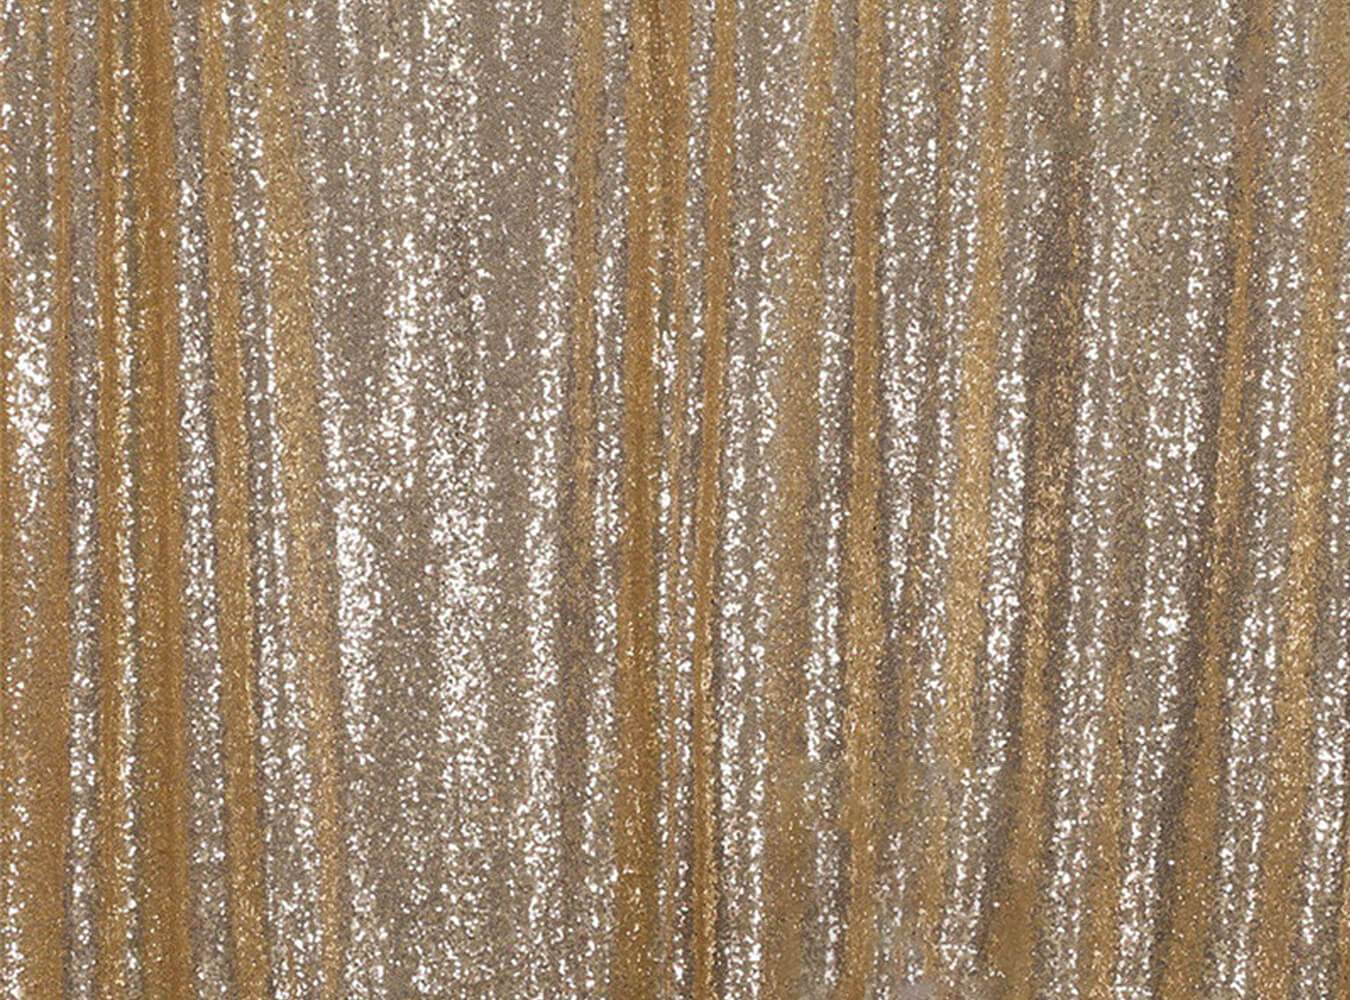 Champagne Gold Sequins Backdrop Sequin Fabric Mermaid Sequin Fabric  IBD-24141 (With Pocket) - 6.5'Wx5'H(2x1.5m)